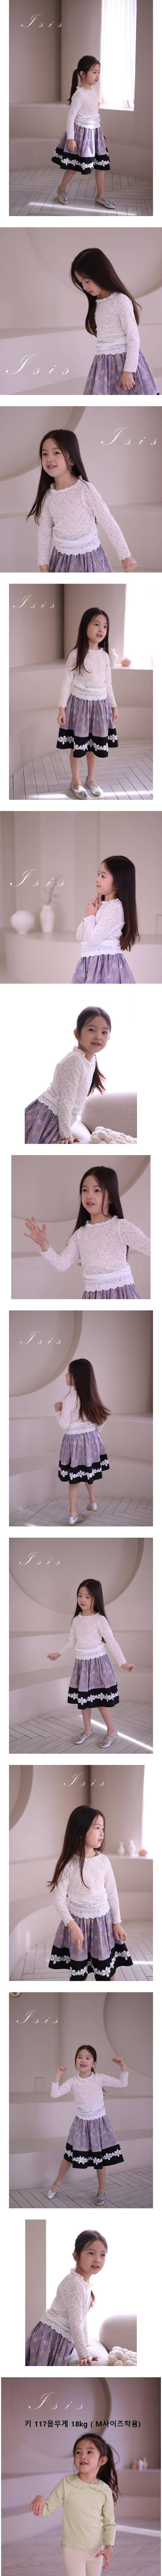 Isis - Korean Children Fashion - #discoveringself - Scarlet Lace Tee - 2